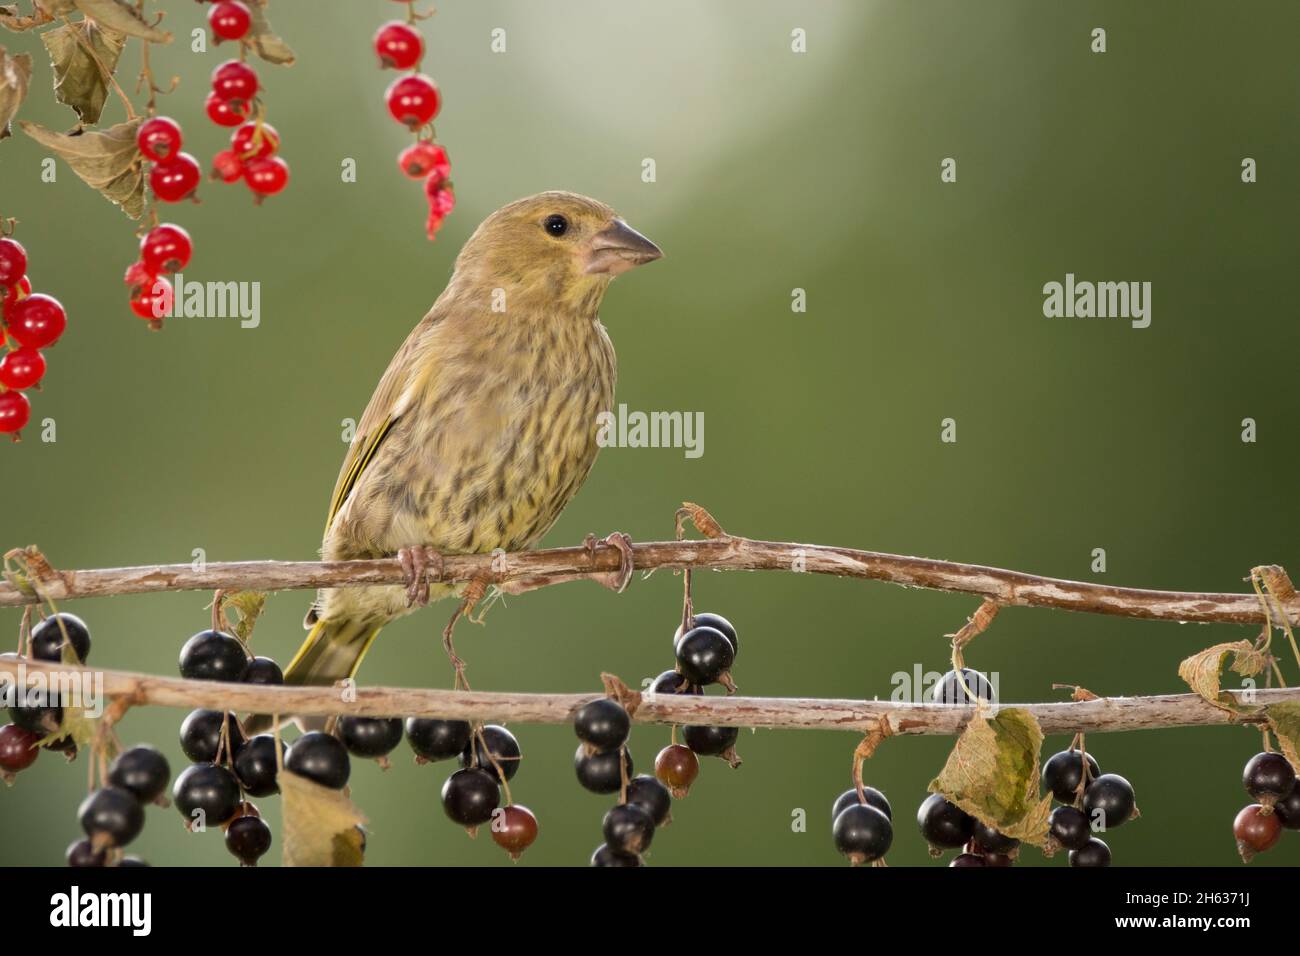 greenfinch is standing on black currant branches Stock Photo